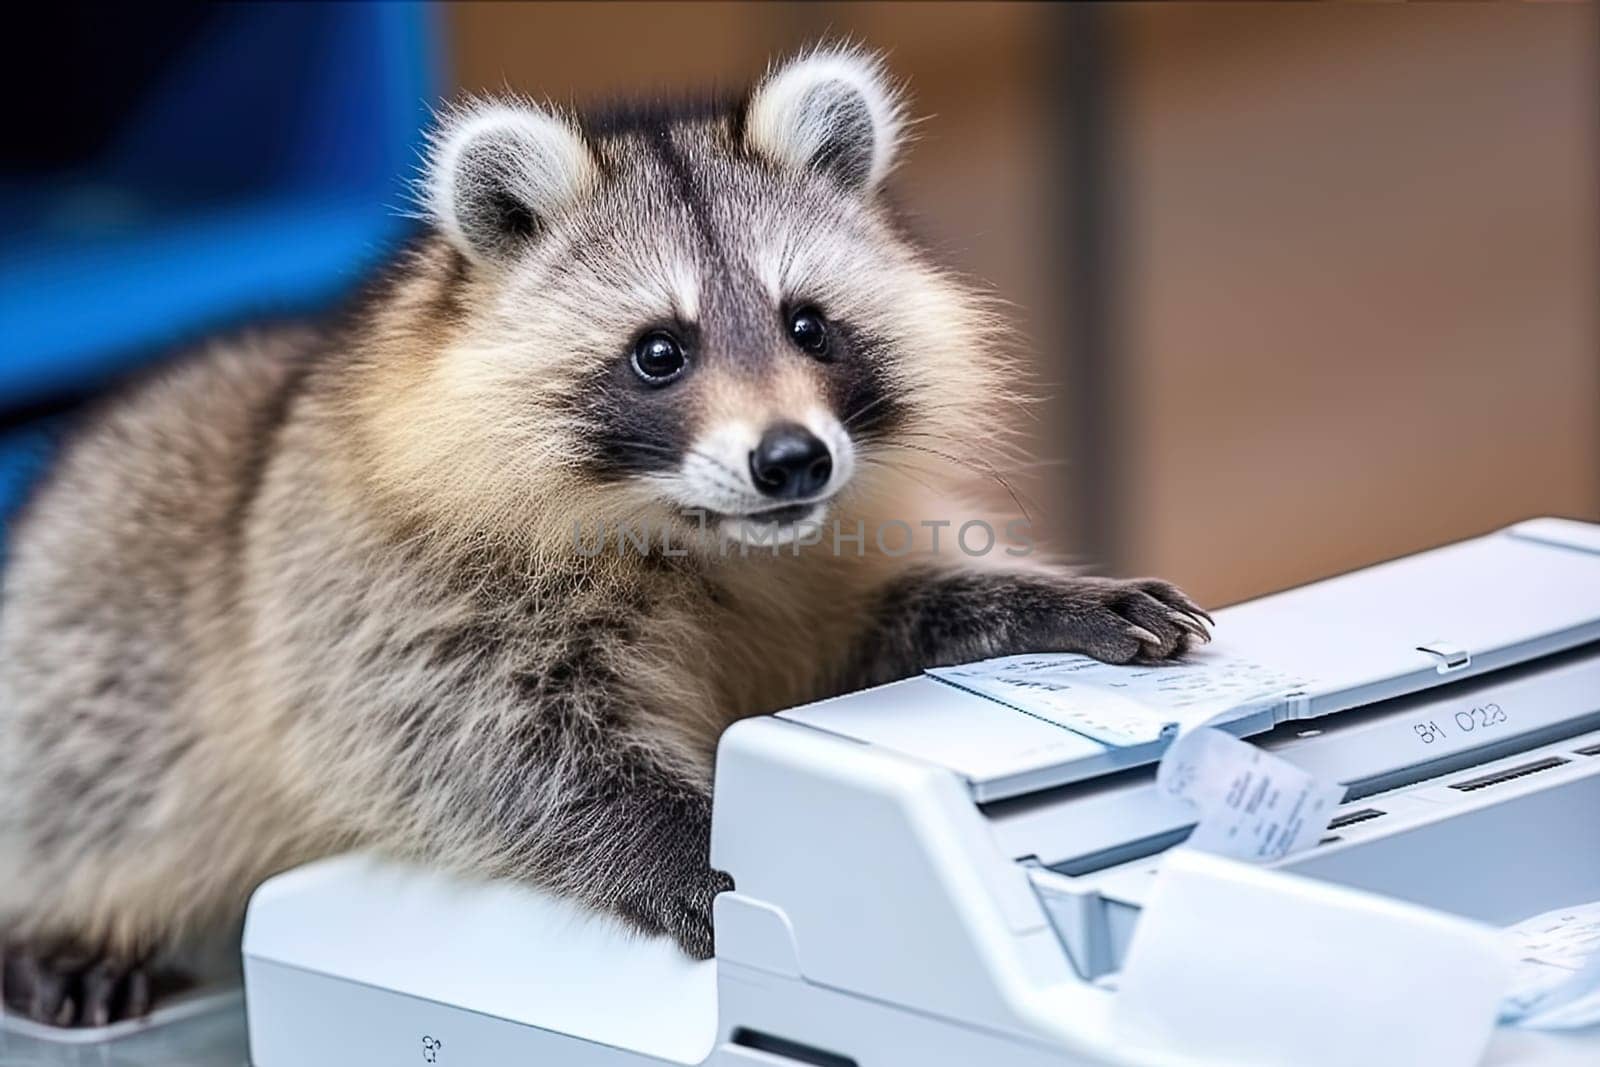 A raccoon in the office printing a photo on a printer. Generative Artificial Intelligence by Yurich32